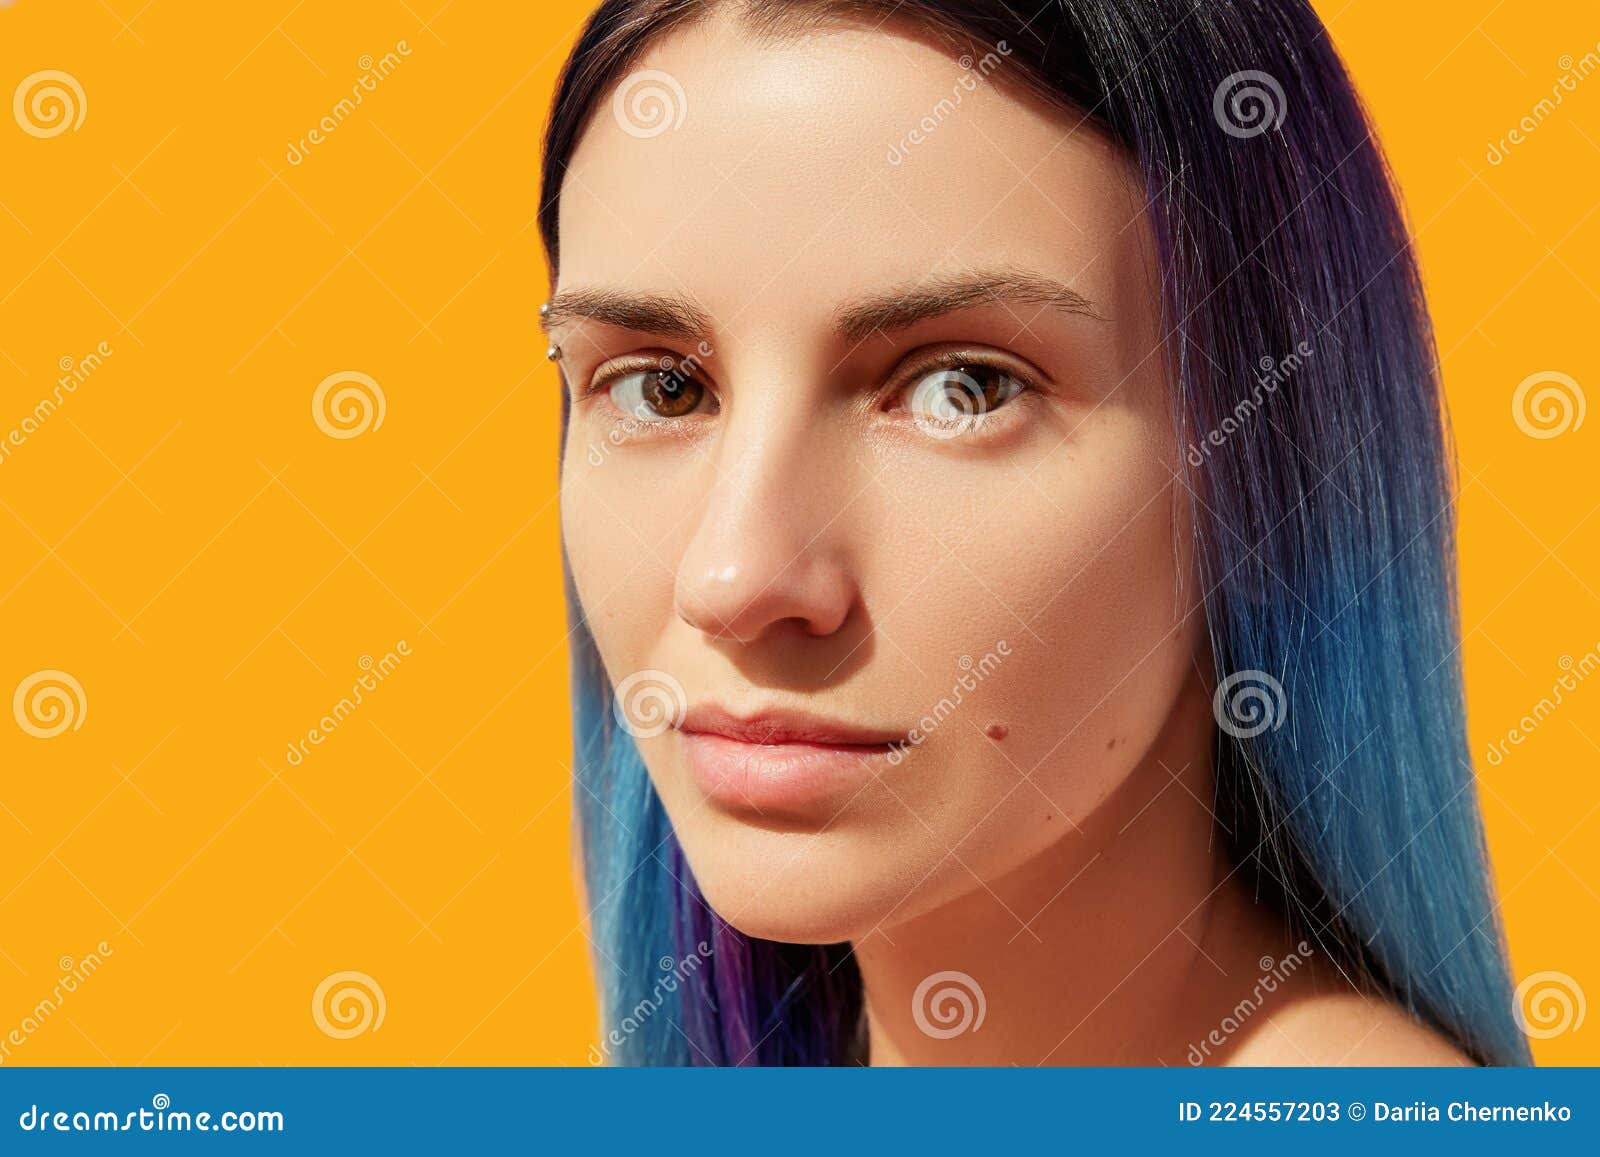 6. "From Pastel to Neon: Different Ways to Wear Yellow Over Blue Hair" - wide 5